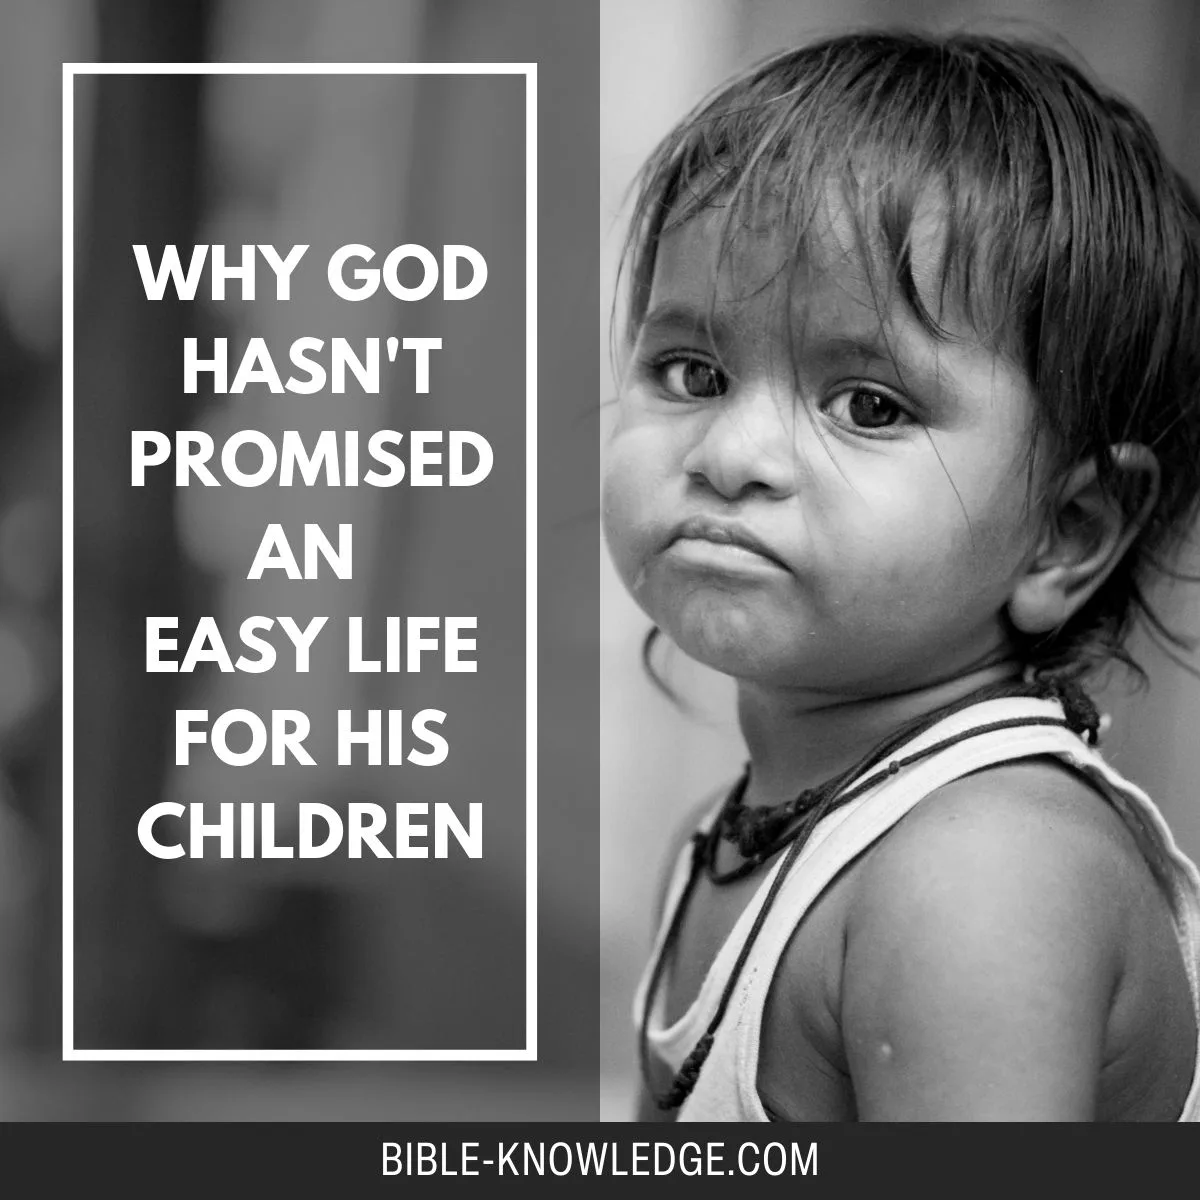 Why God Hasn’t Promised an Easy Life for His Children